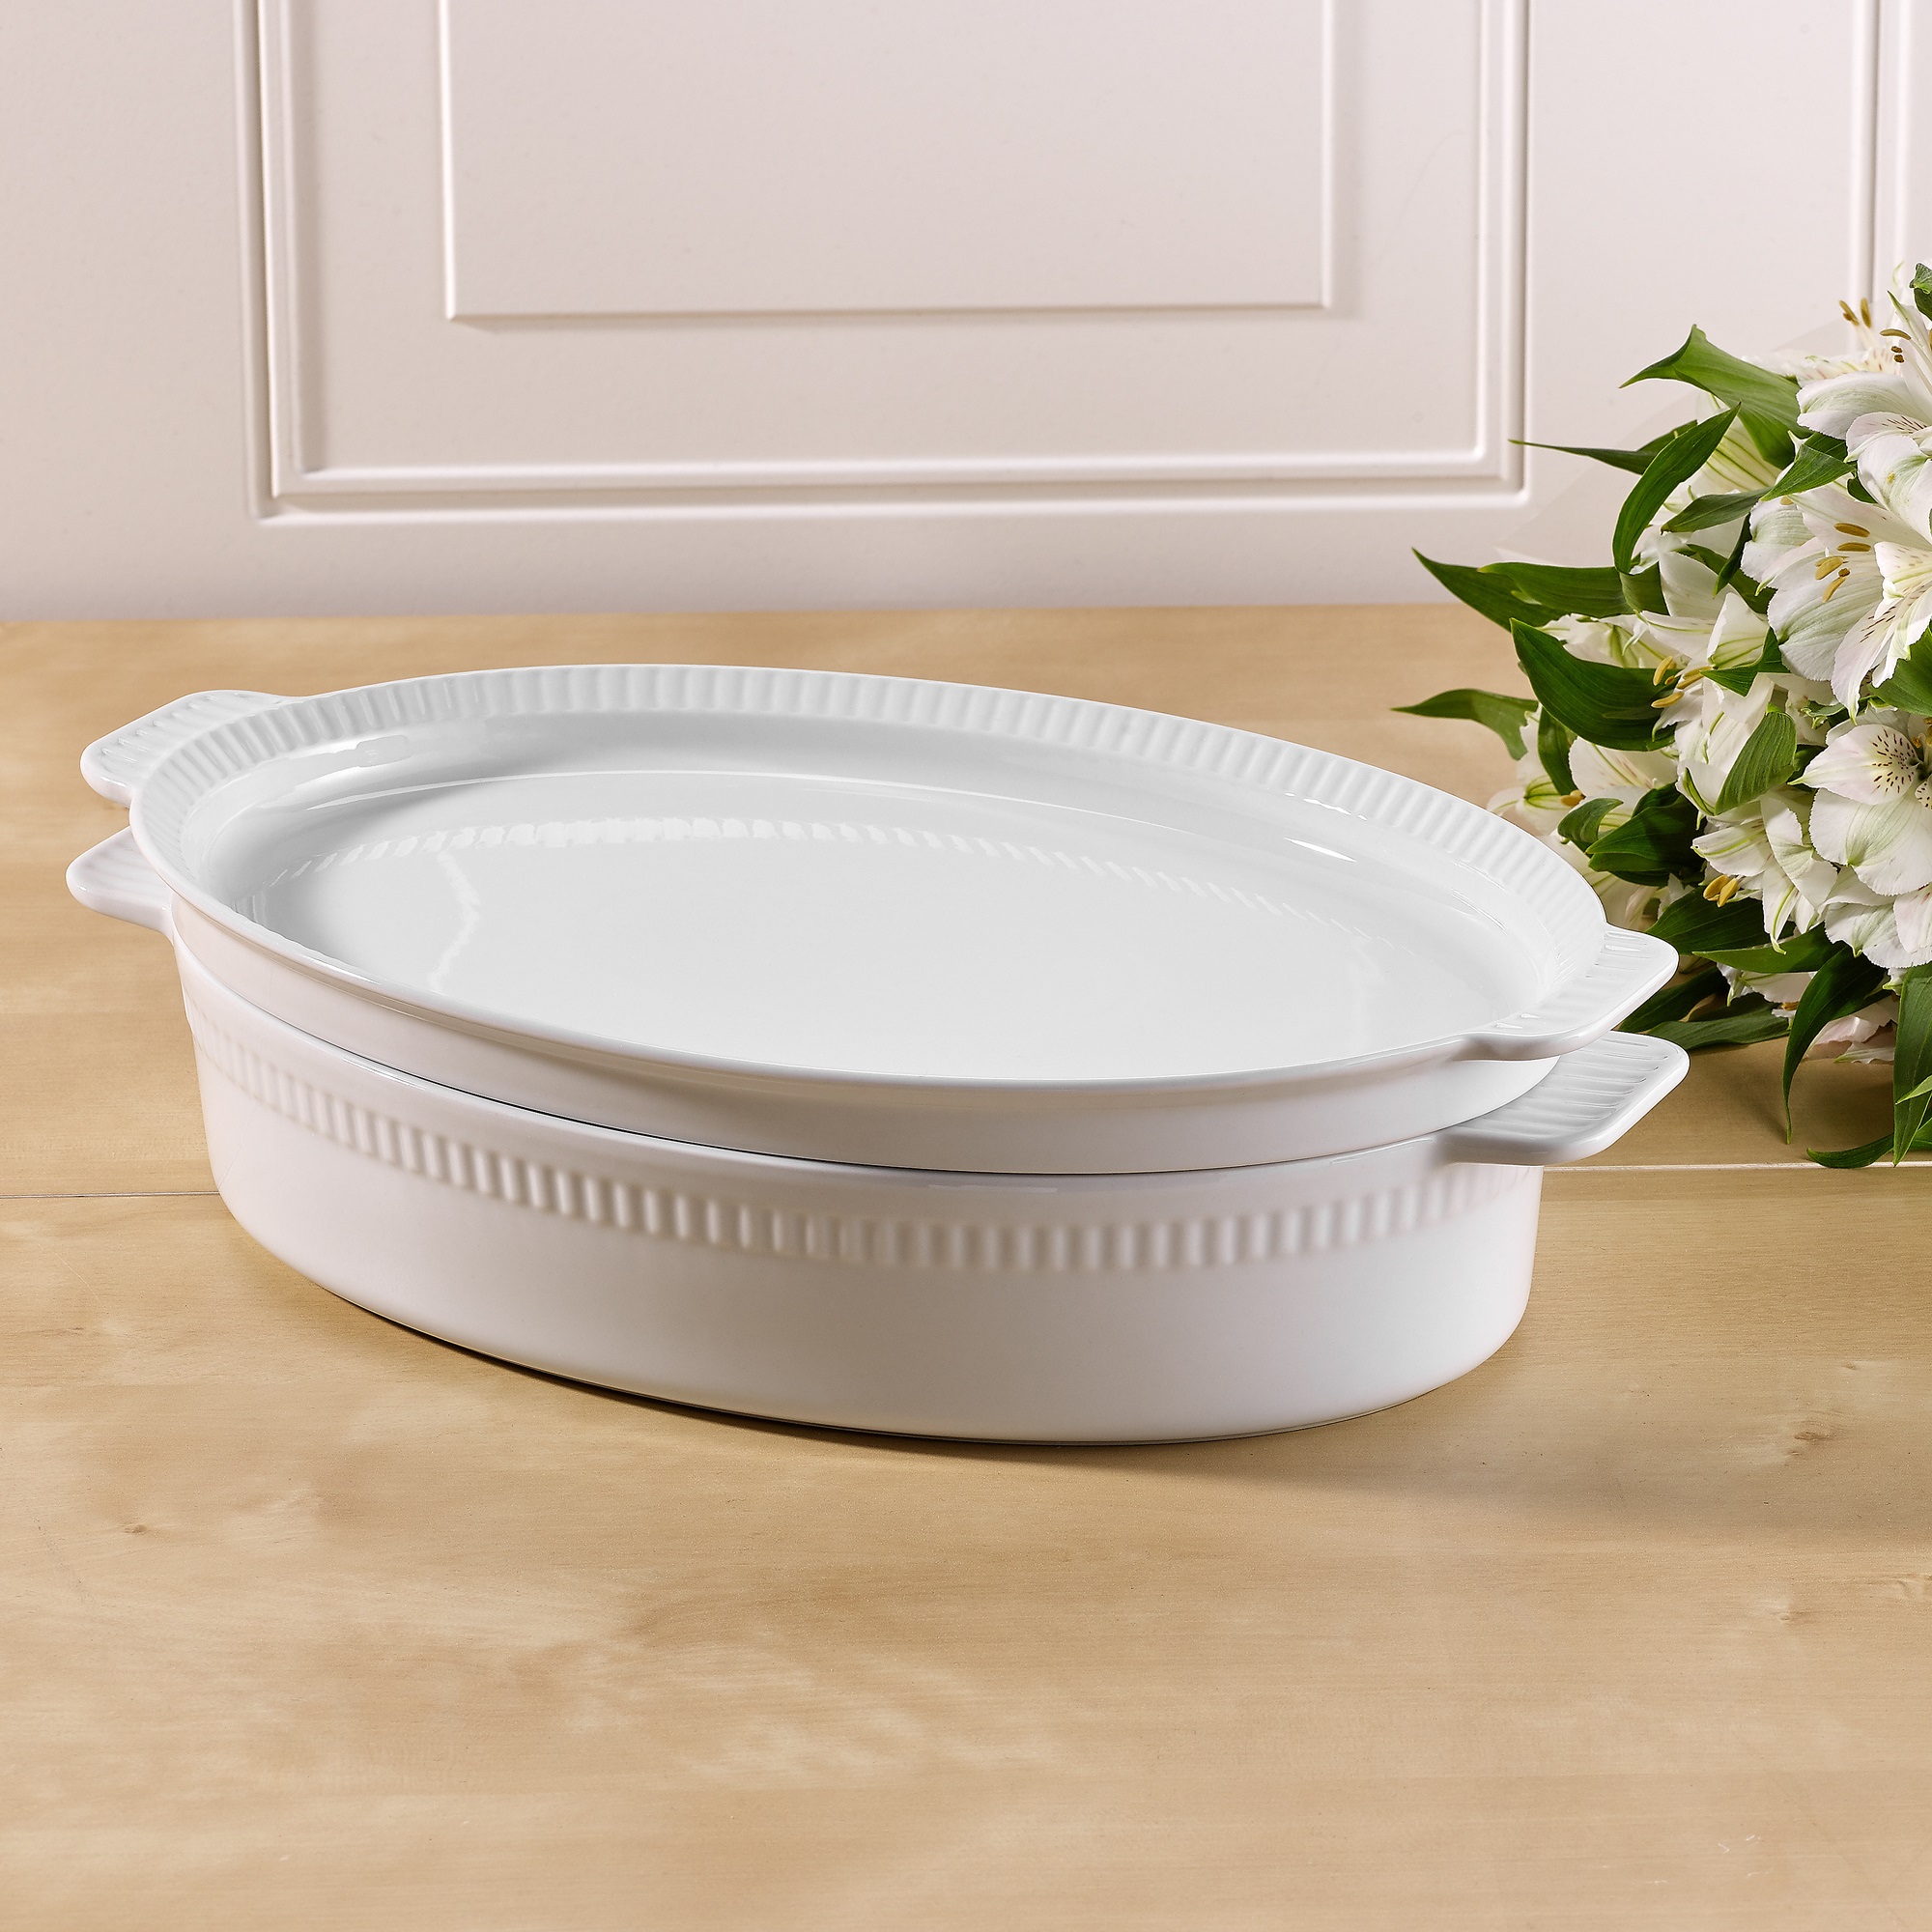 Better Homes & Gardens Oven to Table Serving Dish - Walmart.com